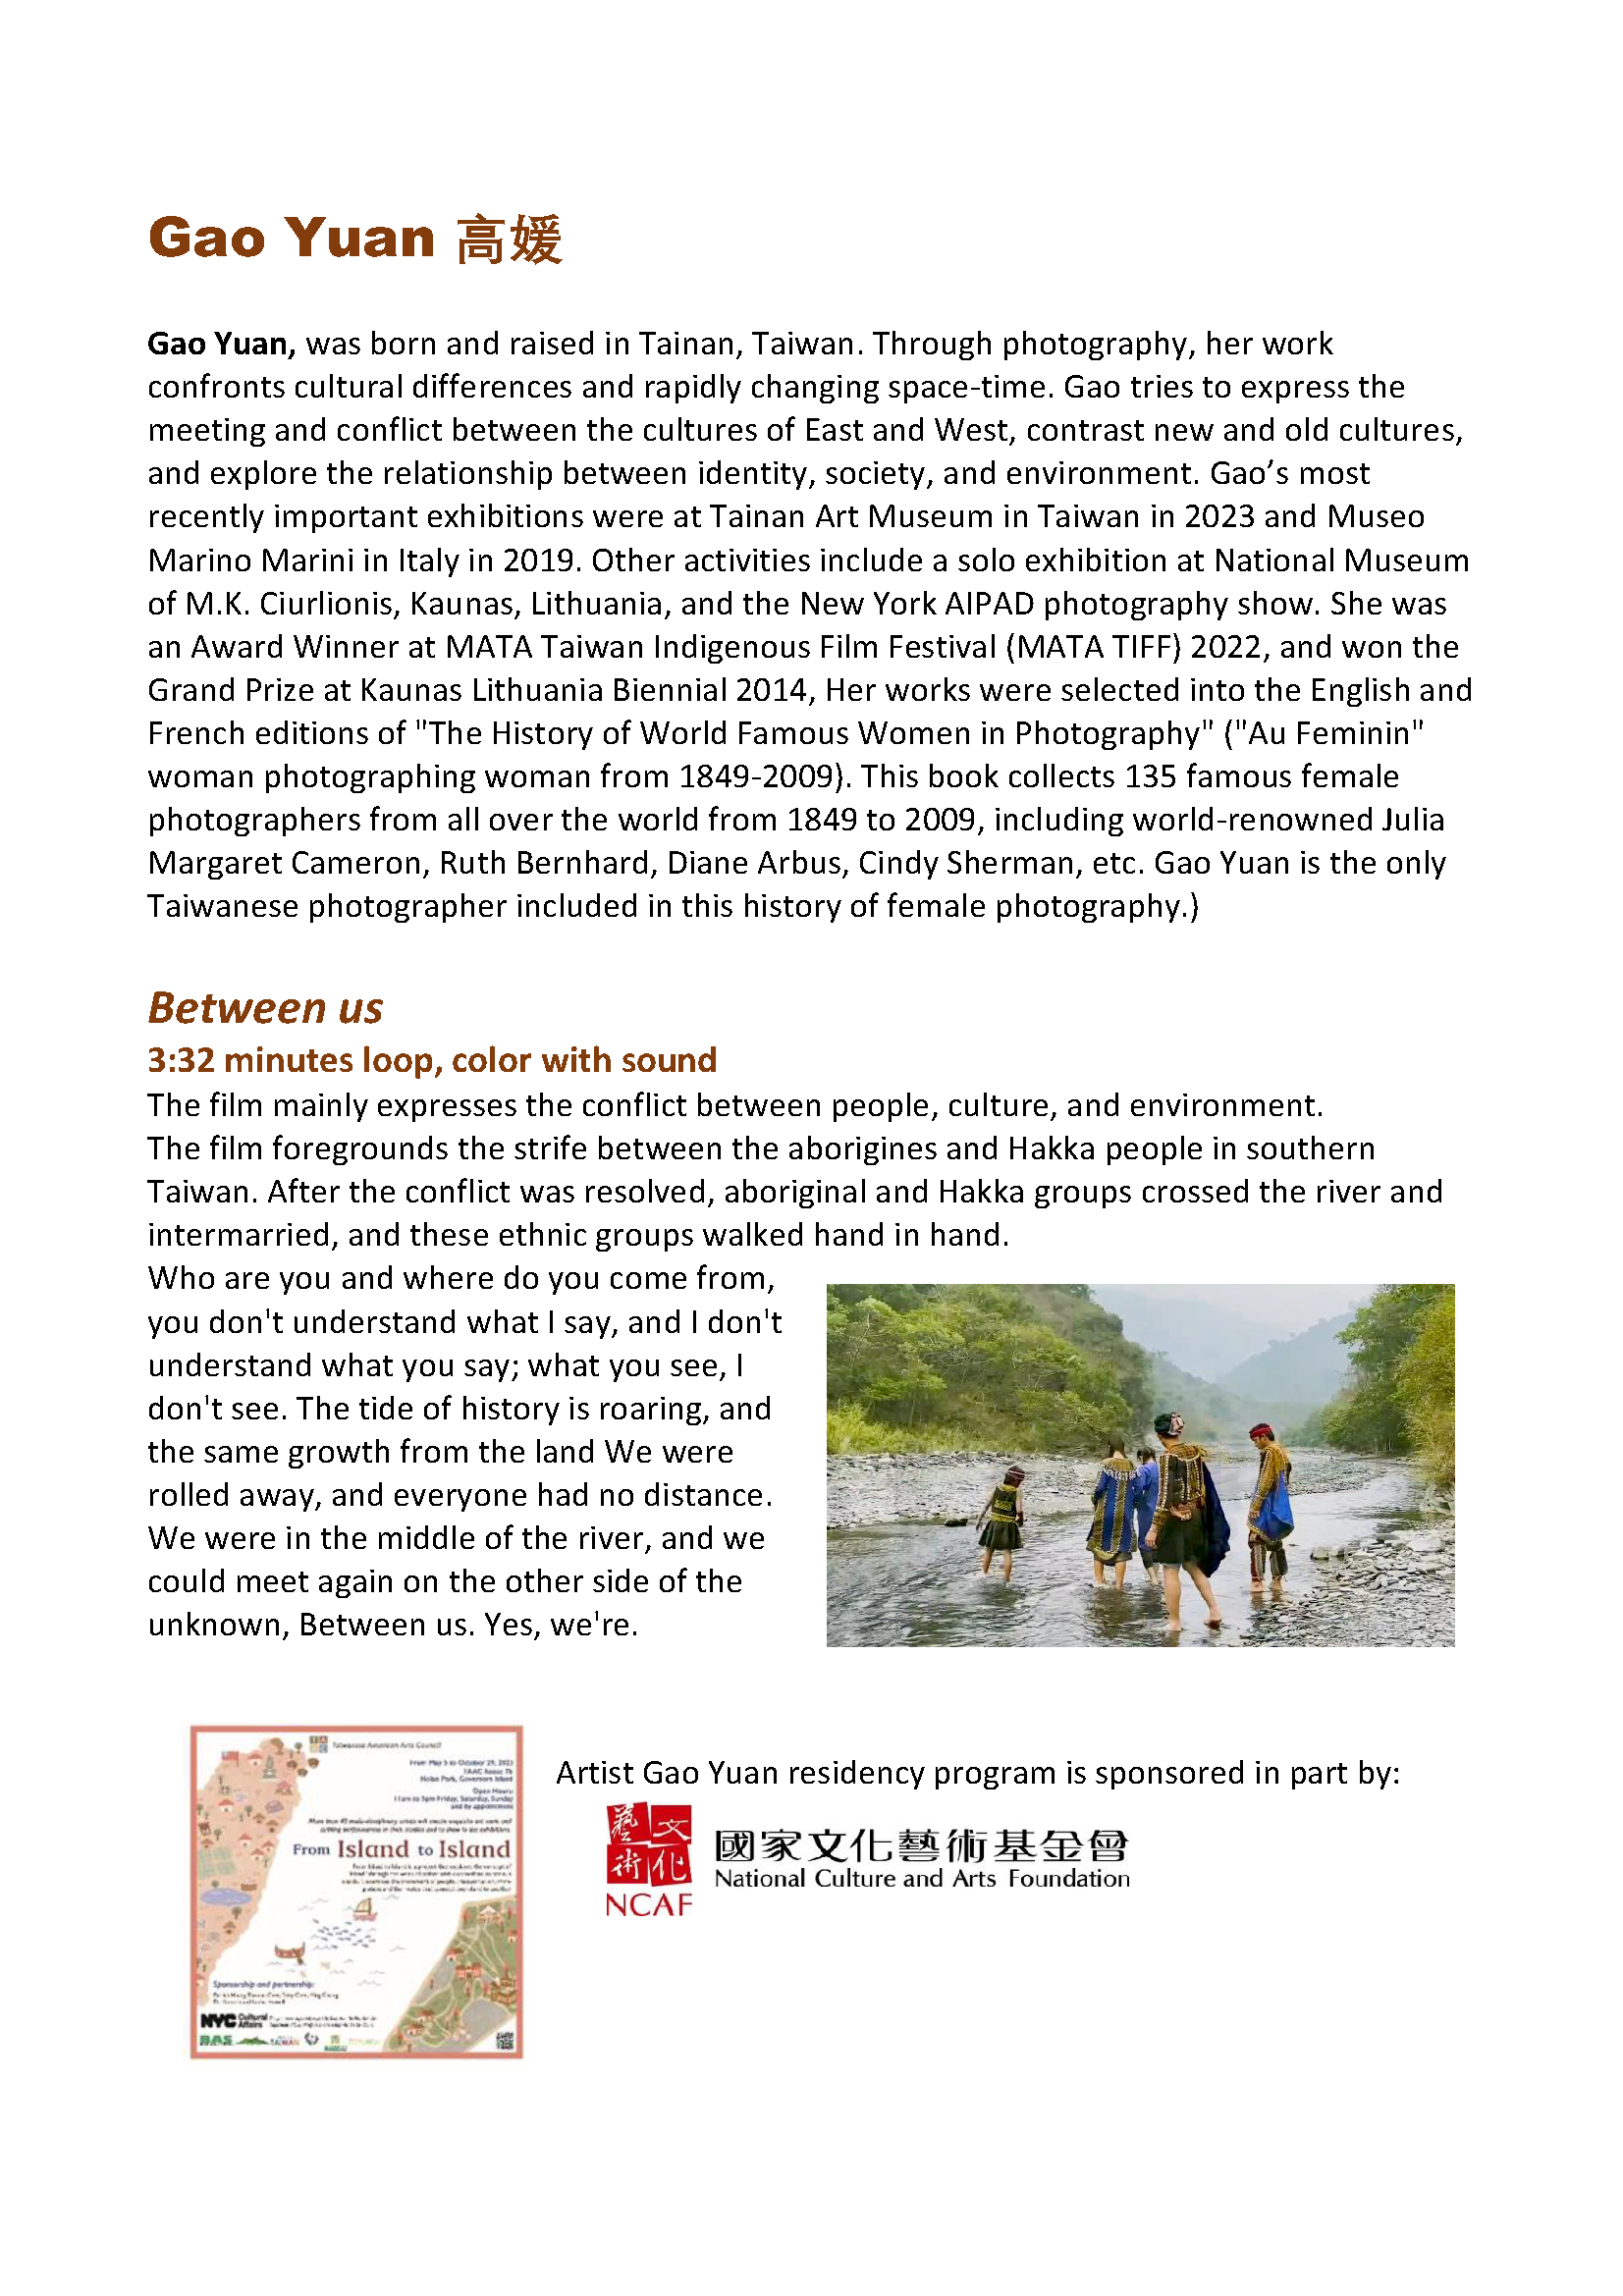 3-Gao-Yuan-one page flyer-statemnet-Bio-2023-new_Page_1.png